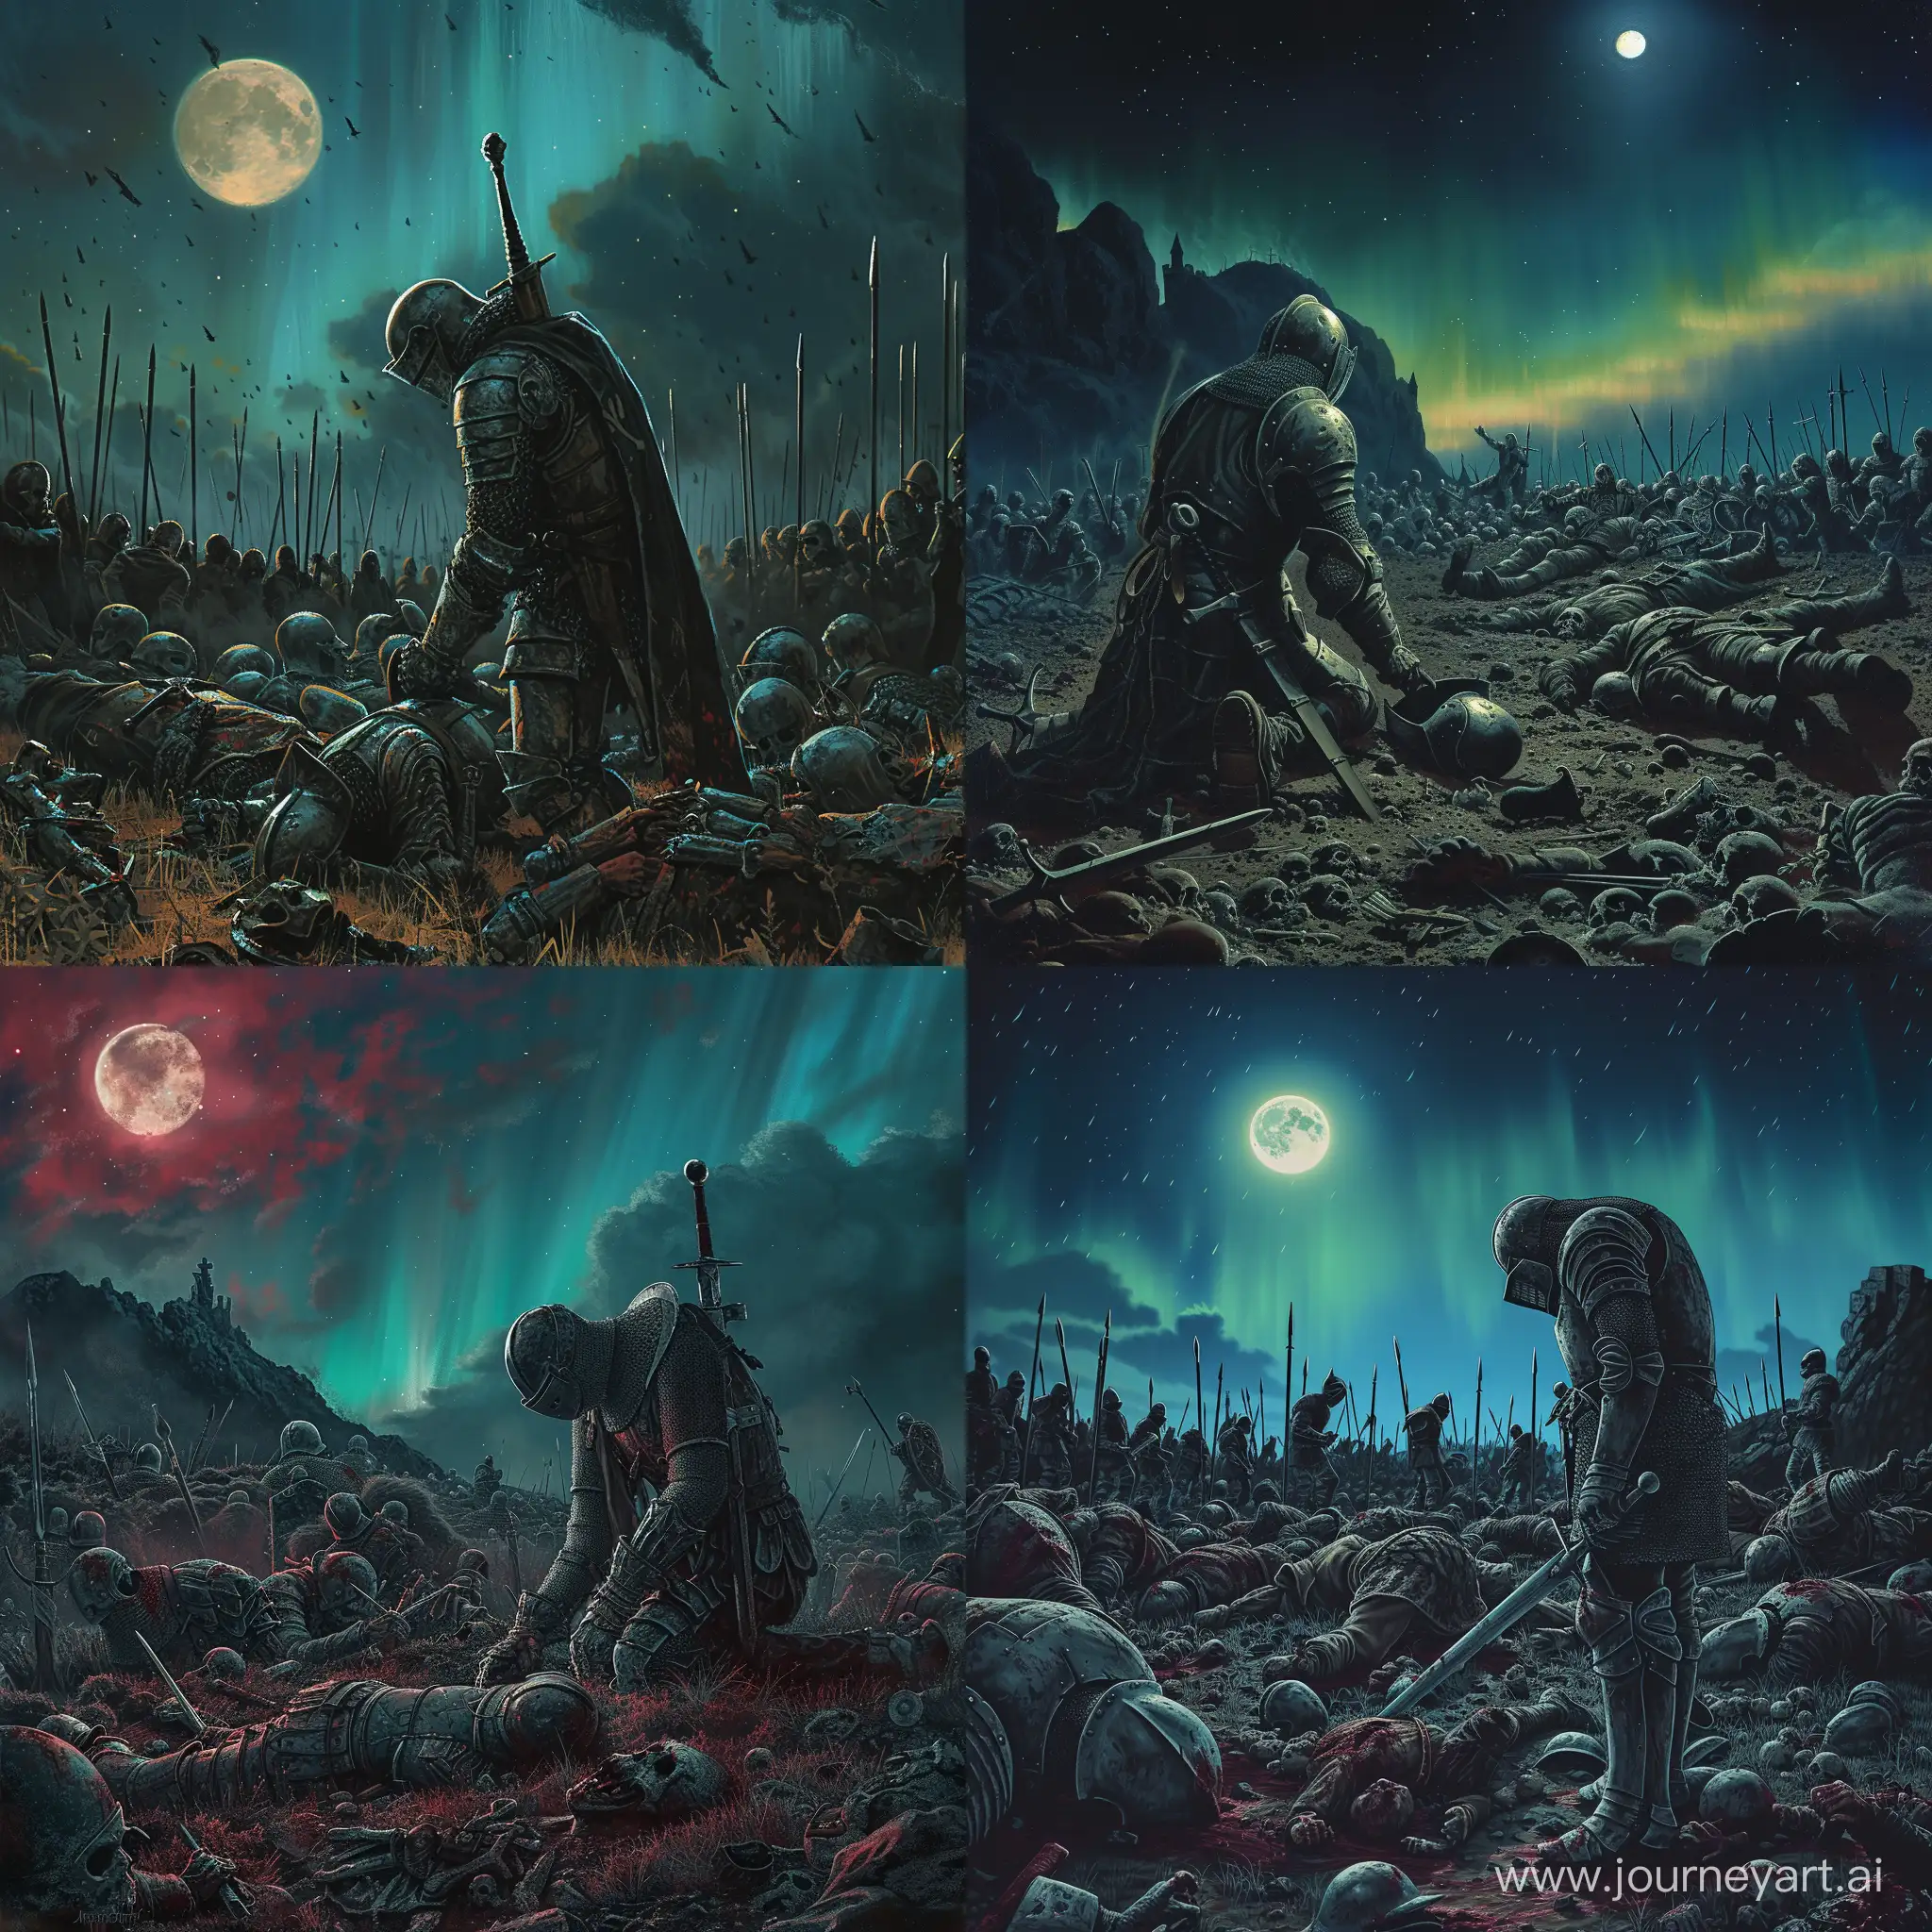 a knight paying respect to fallen comrades in a battlefield full of dead knights, night time, full moon, aurora borealis, 1970's dark fantasy style, gritty, detailed